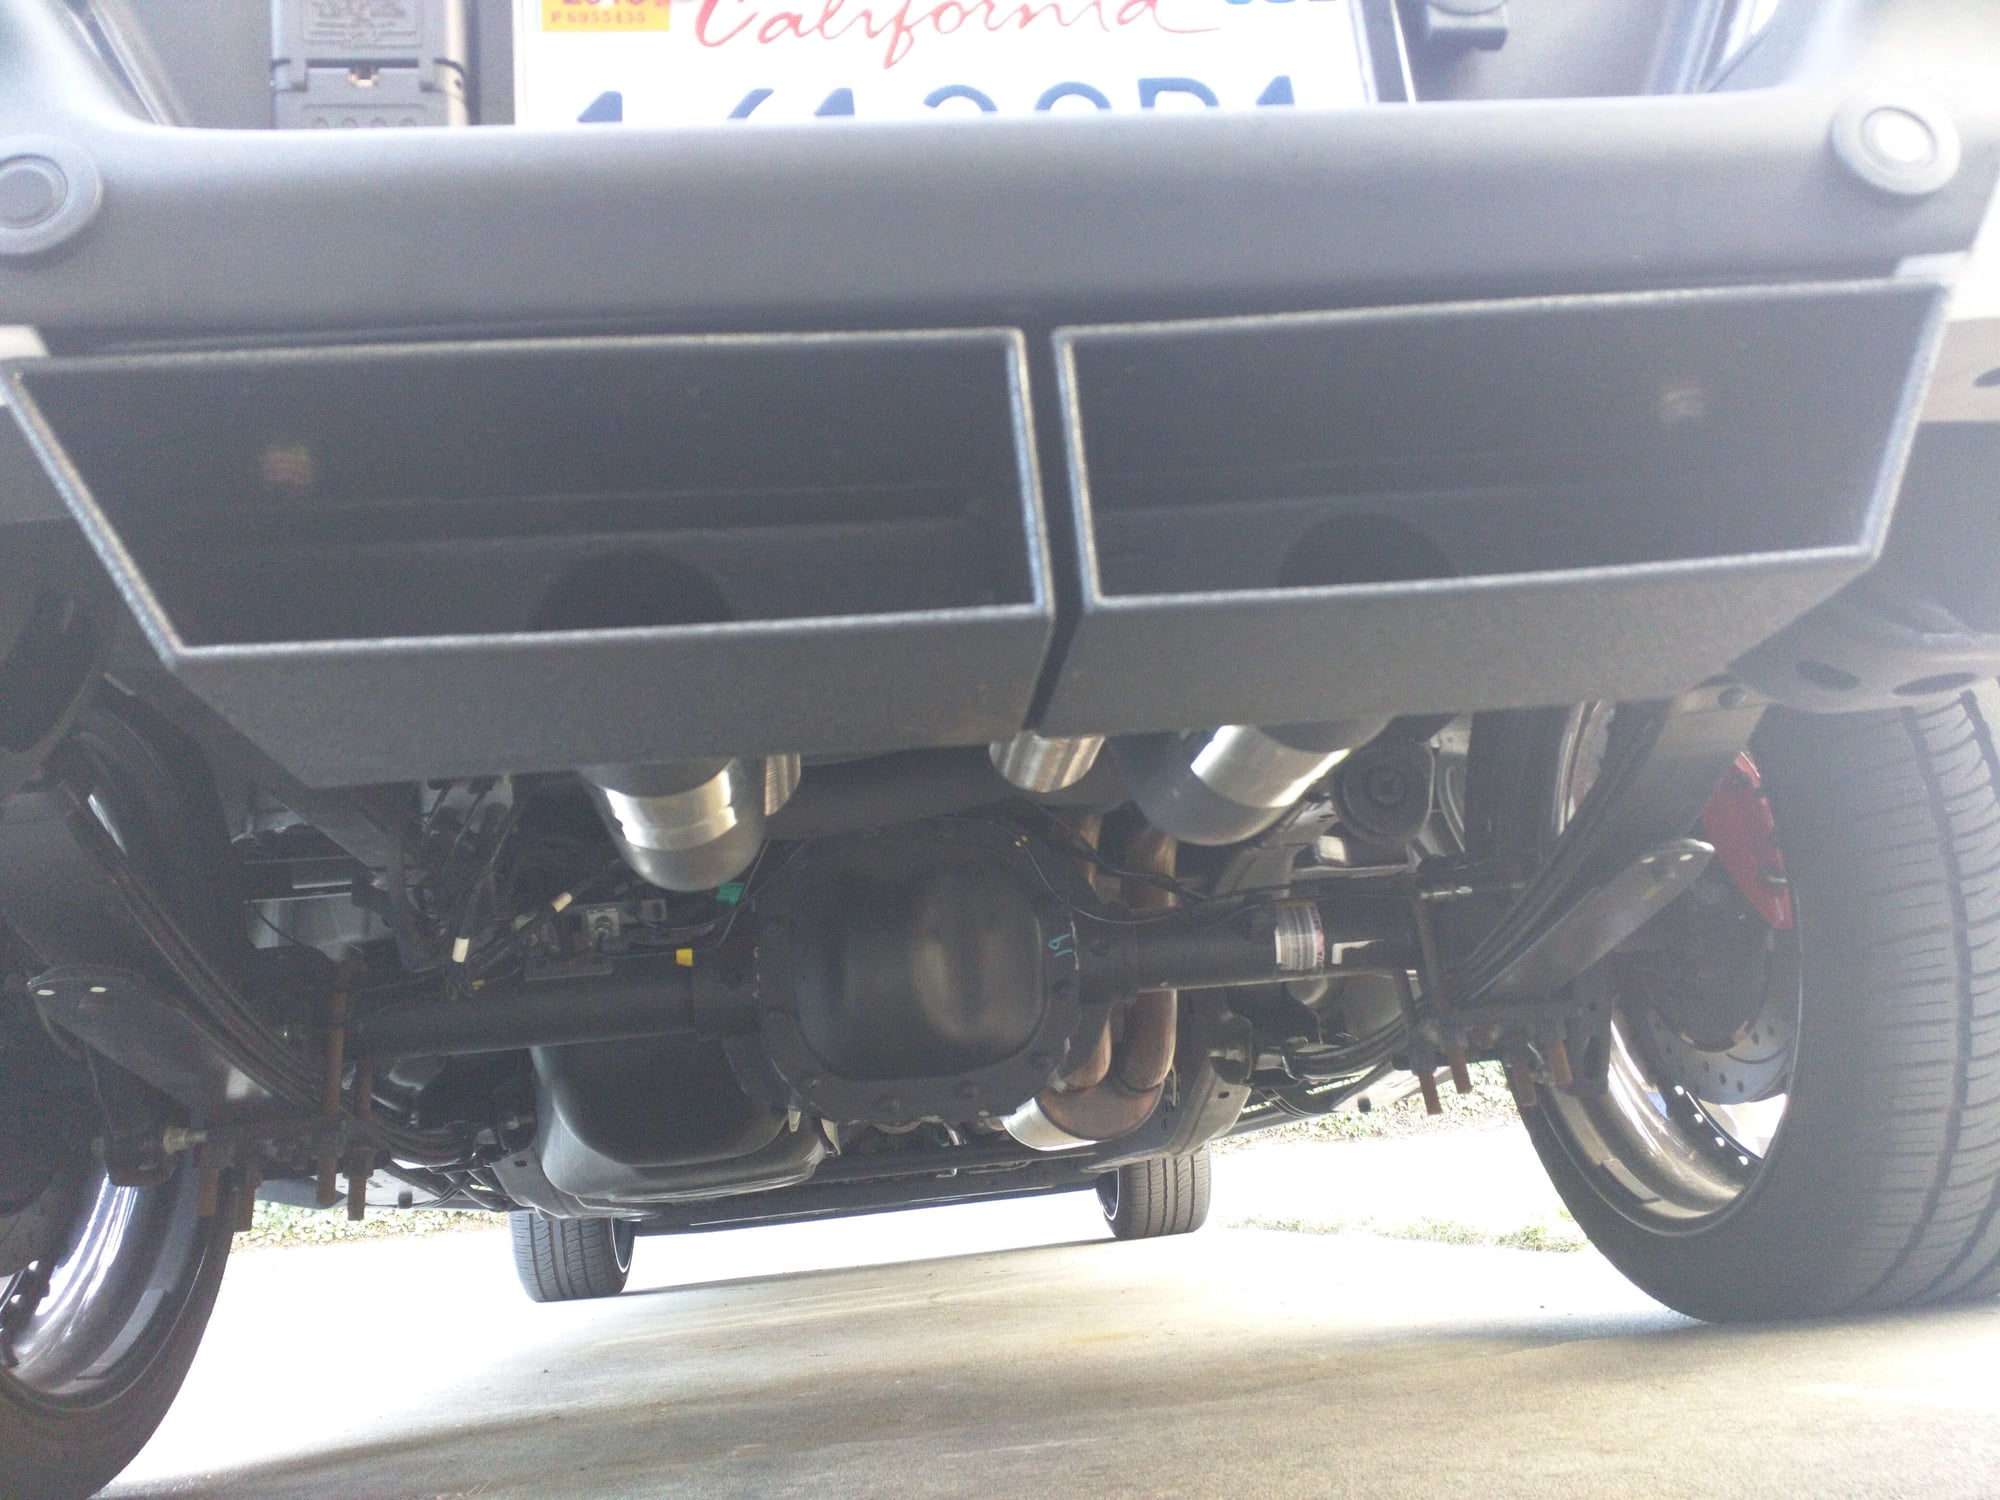 Dual rear exit exhaust - Ford F150 Forum - Community of Ford Truck Fans